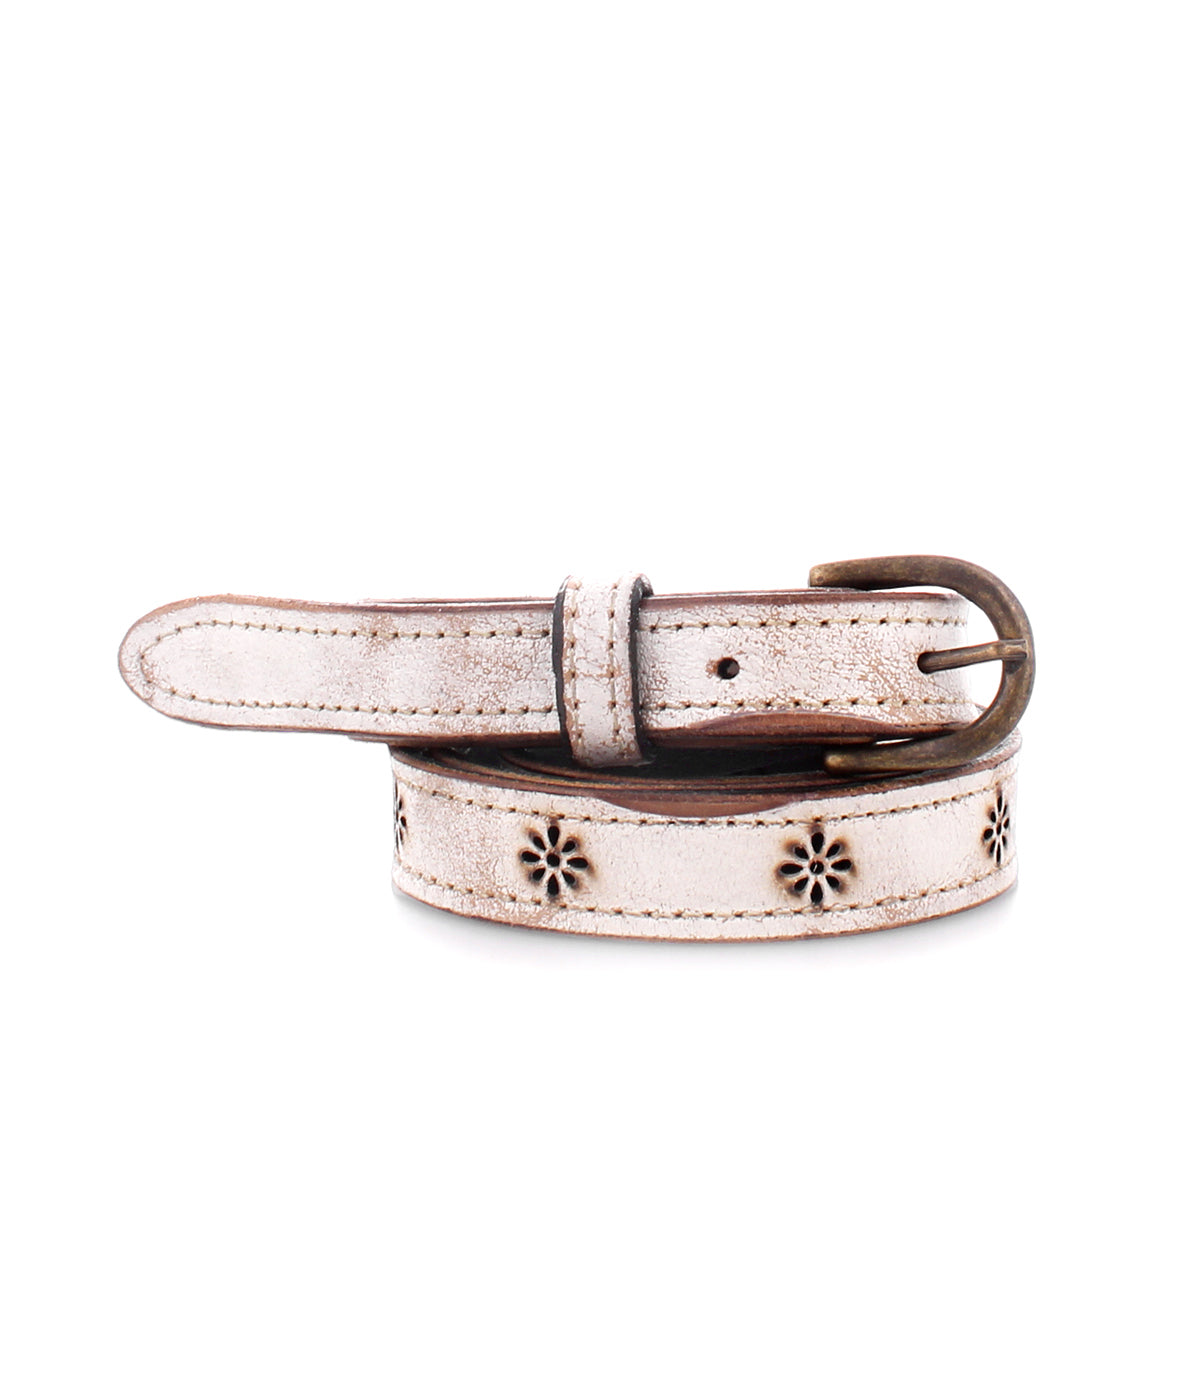 A Monae II leather accessory adorned with flowers, the white Belt Stu belt is a combination of style and functionality.